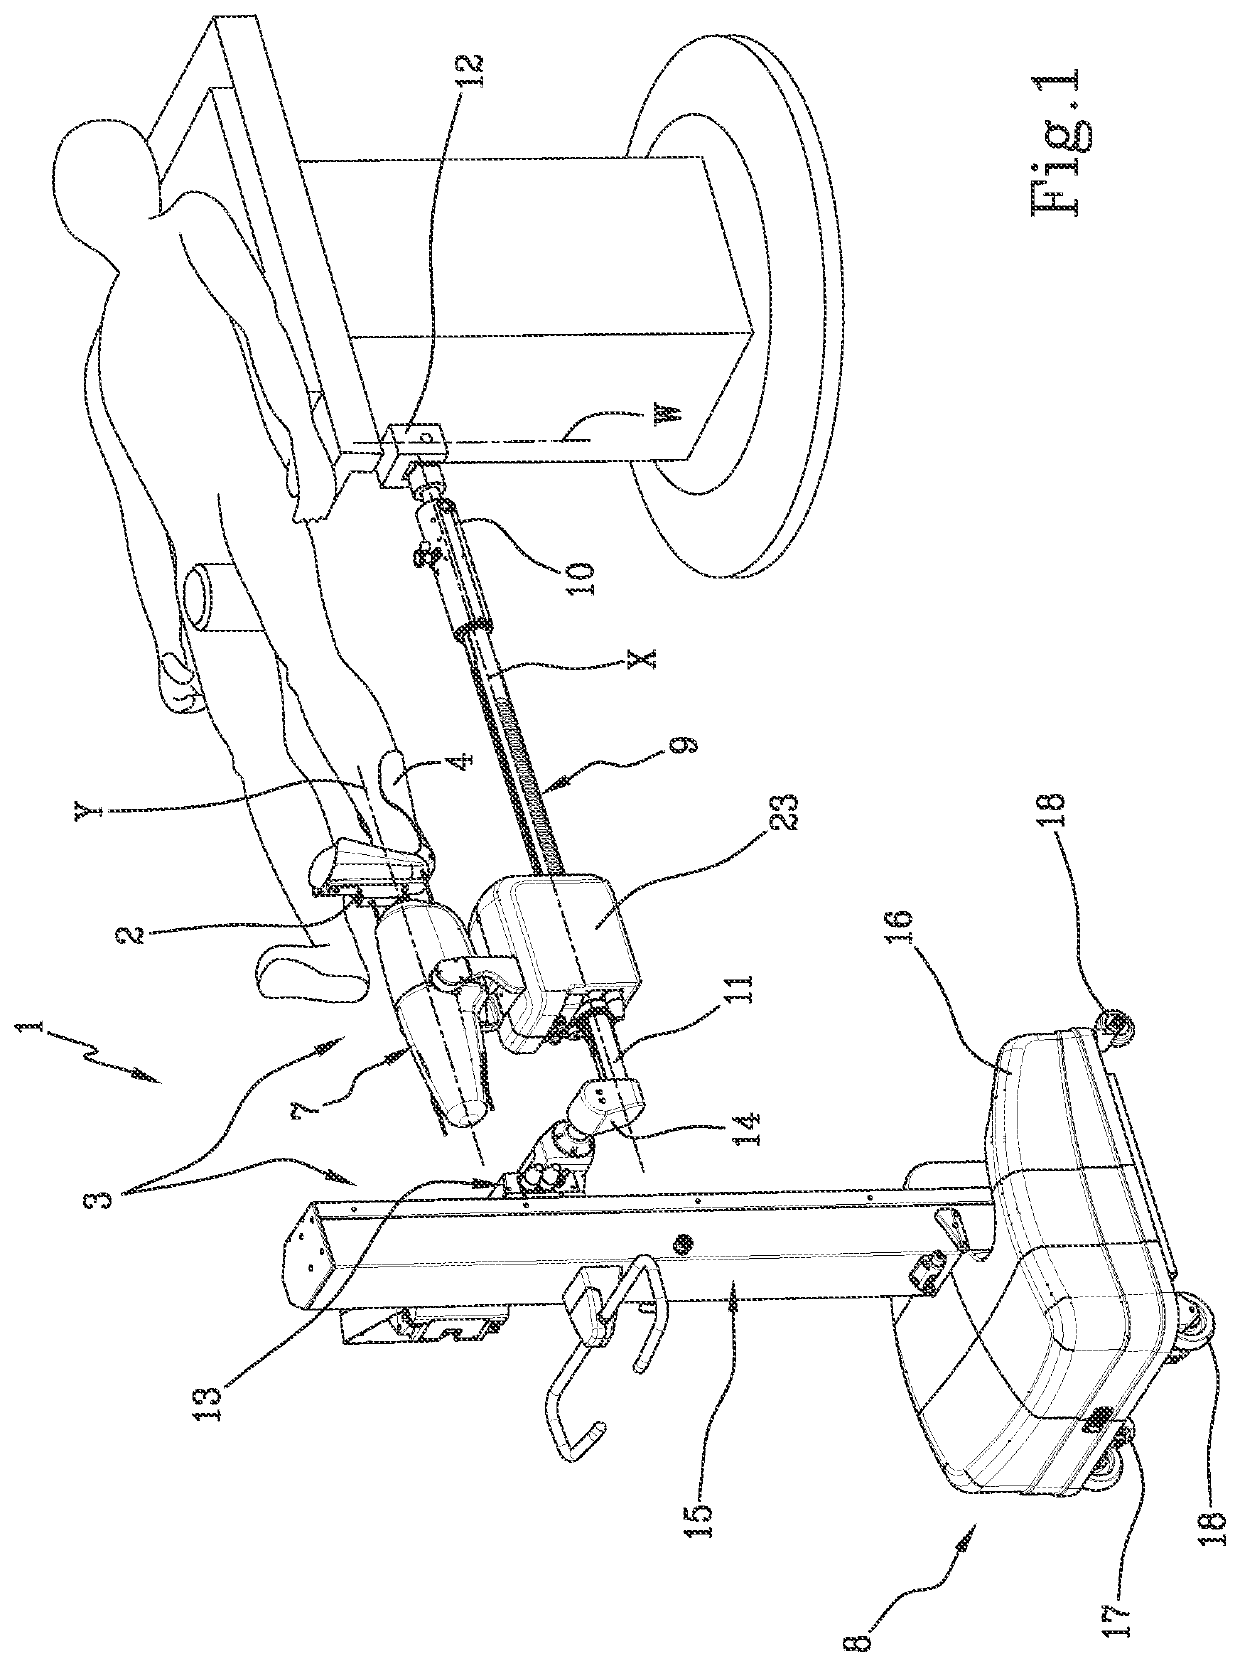 Positioning apparatus of a patient's limb